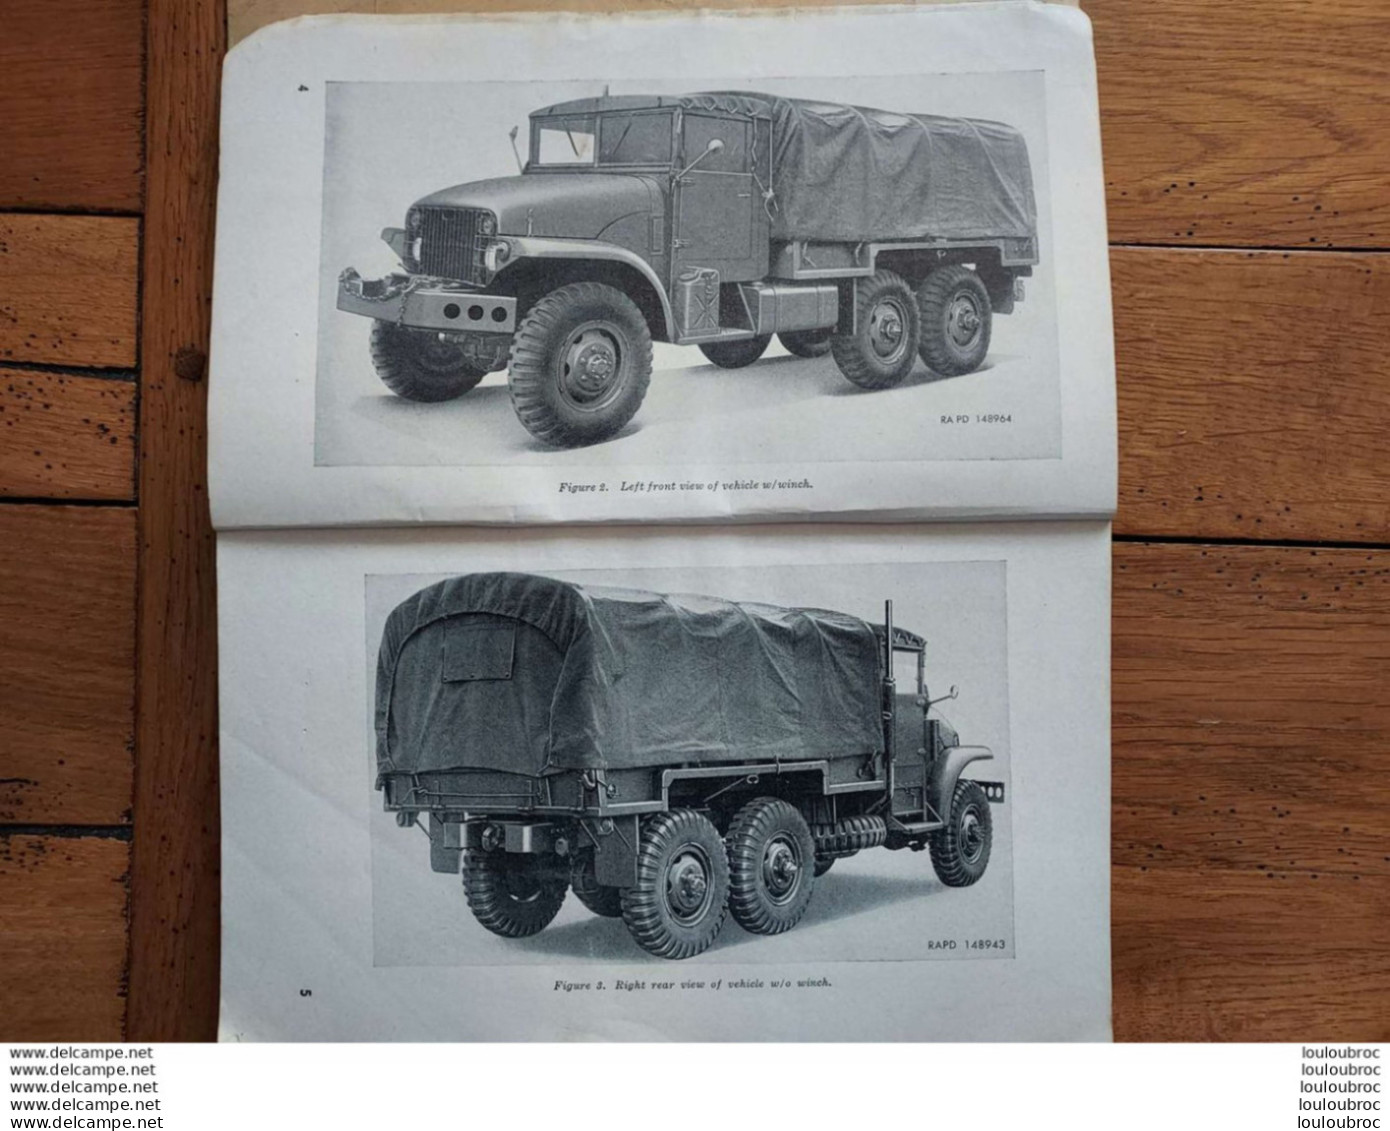 TECHNICAL MANUAL TM9-819A  6X6 TRUCK M135  JULY 1951 OF THE ARMY  437 PAGES ECRIT EN ANGLAIS - Voitures